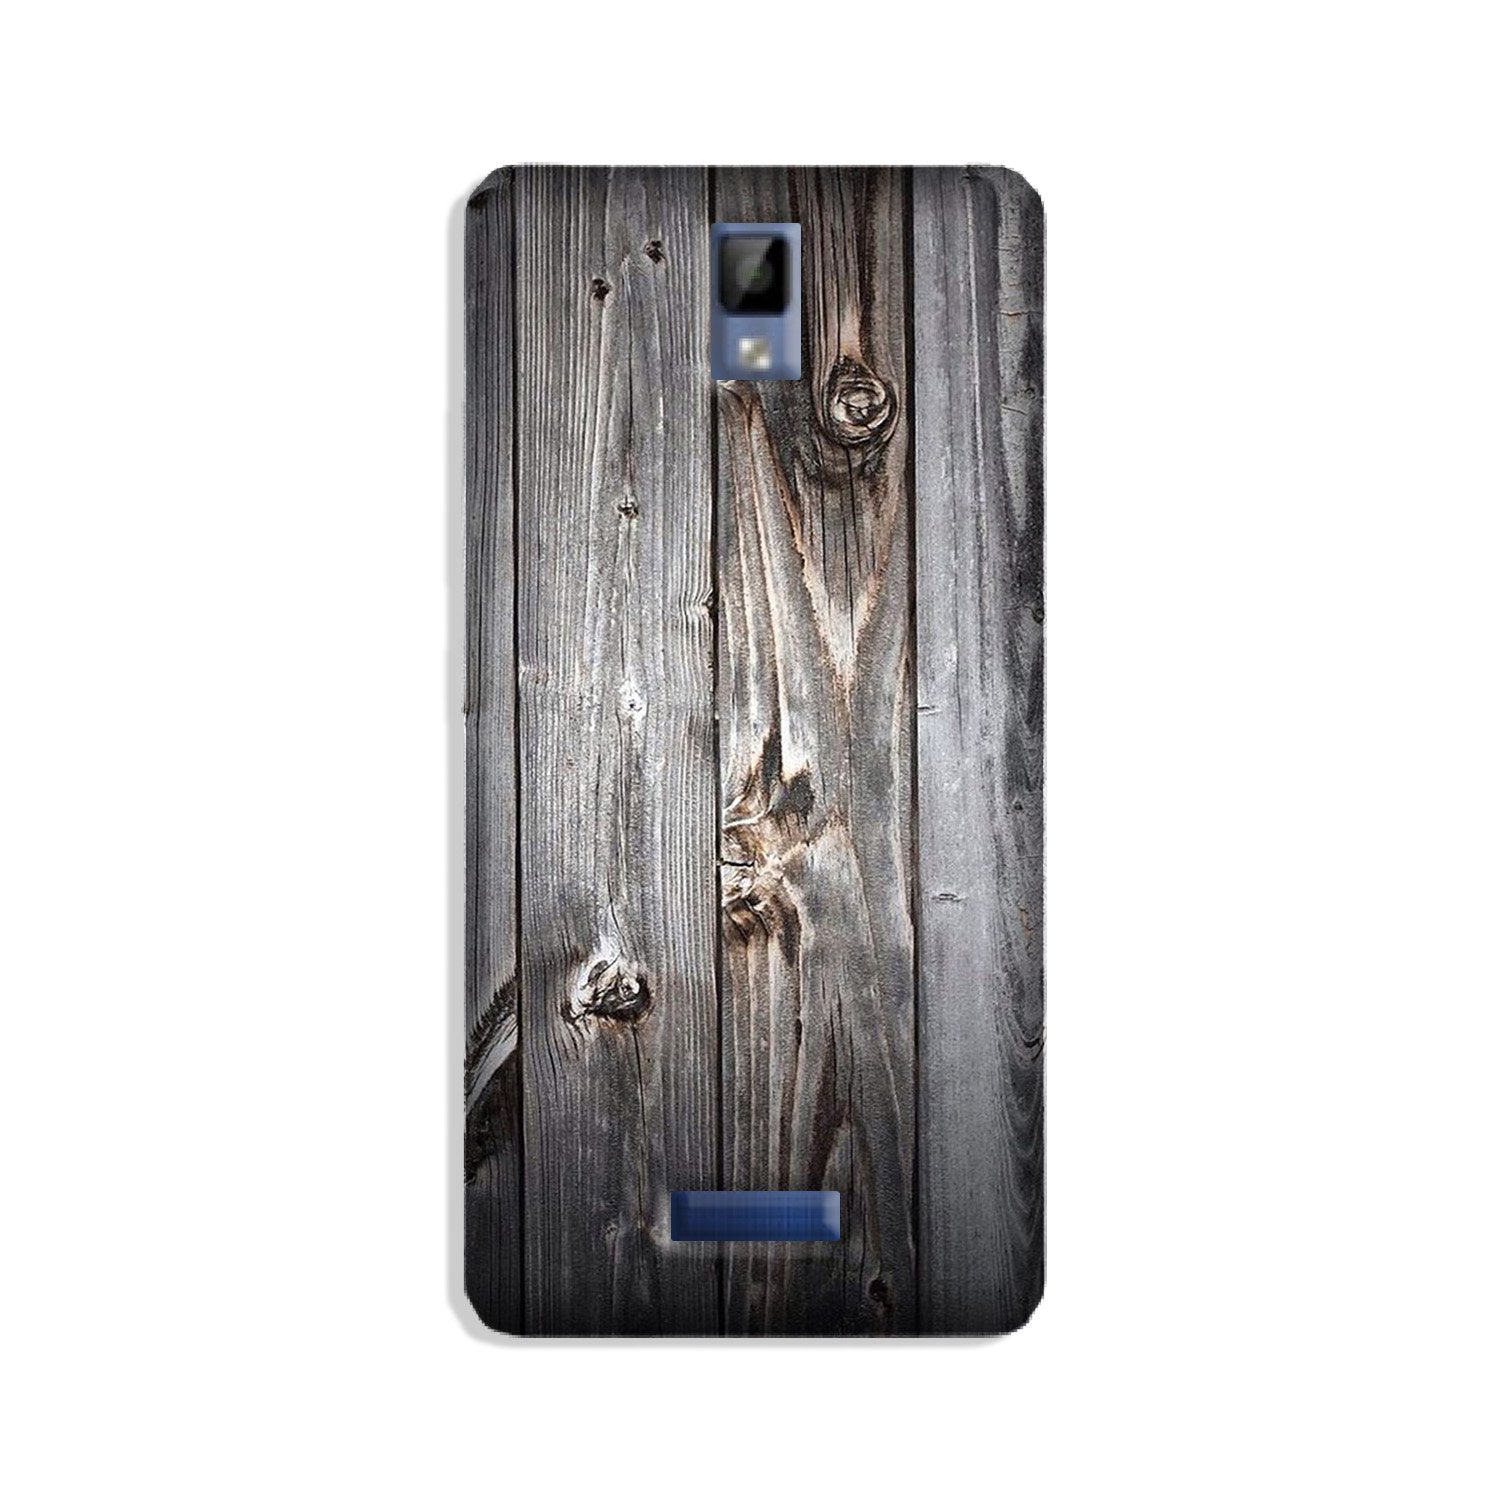 Wooden Look Case for Gionee P7(Design - 114)